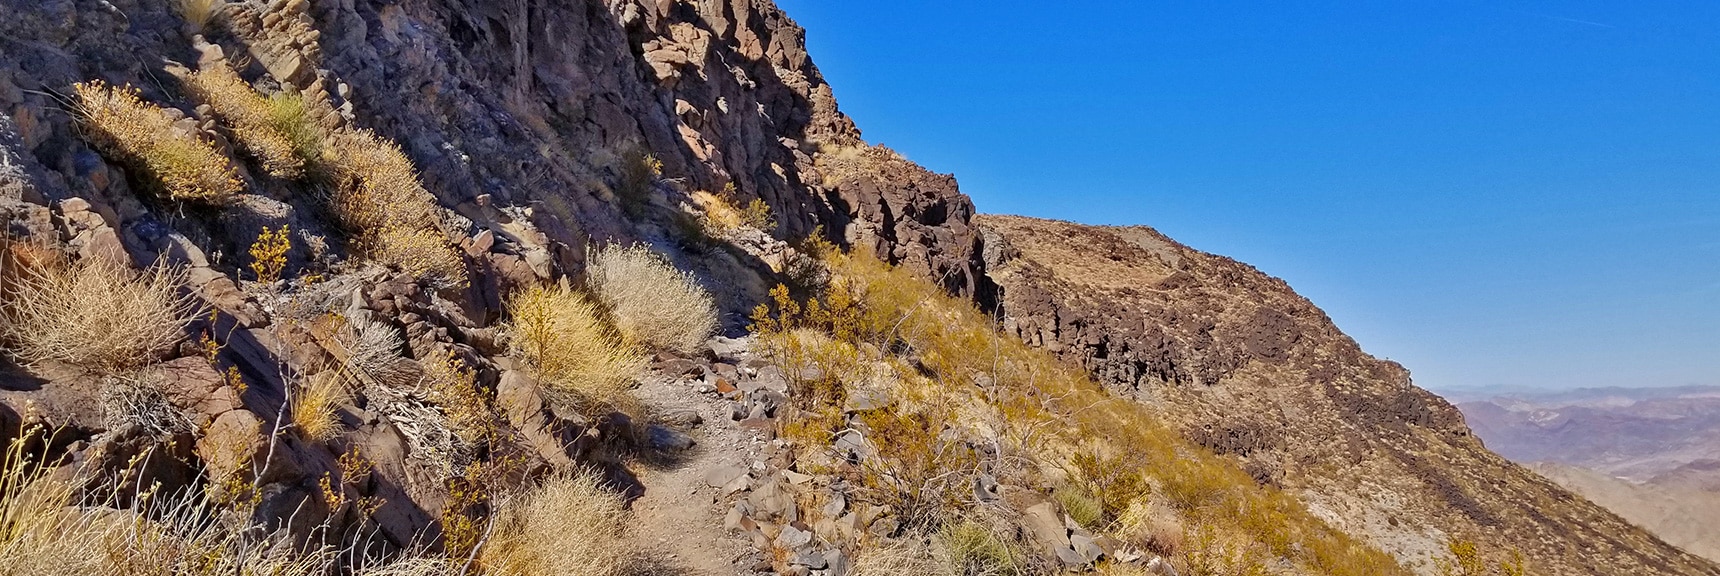 Skirting the Base of Fortification Hill Head Wall. | Fortification Hill | Lake Mead National Recreation Area, Arizona